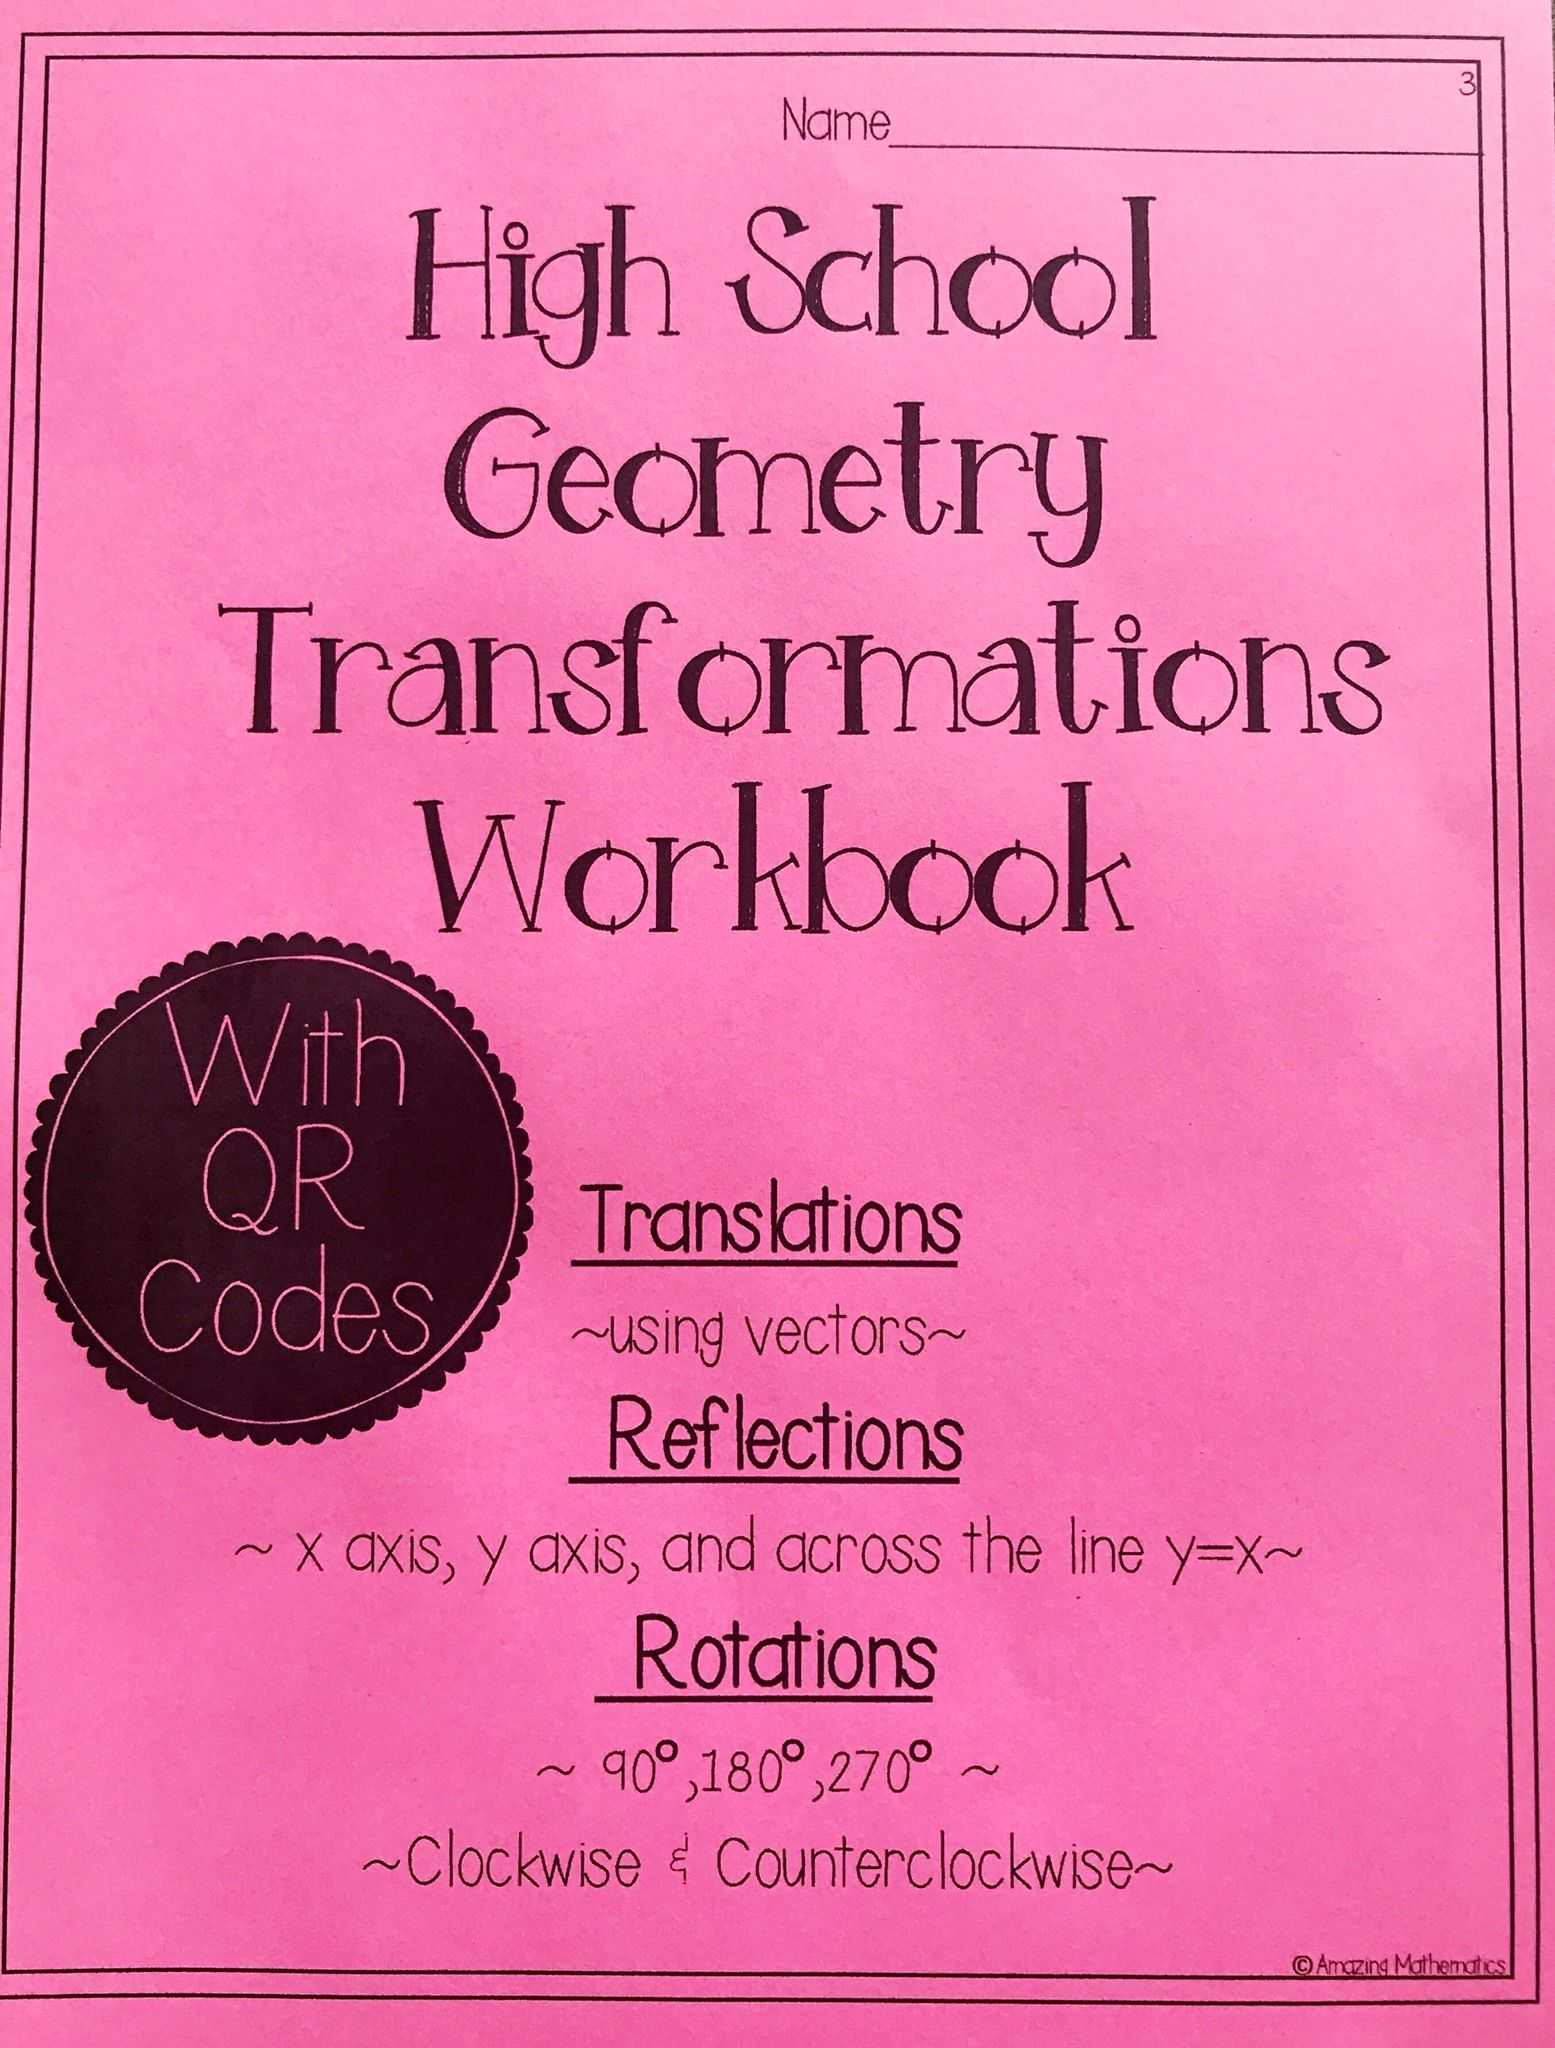 Translation Practice Worksheet Along with Hs Geometry Transformations Workbook Translations Rotations